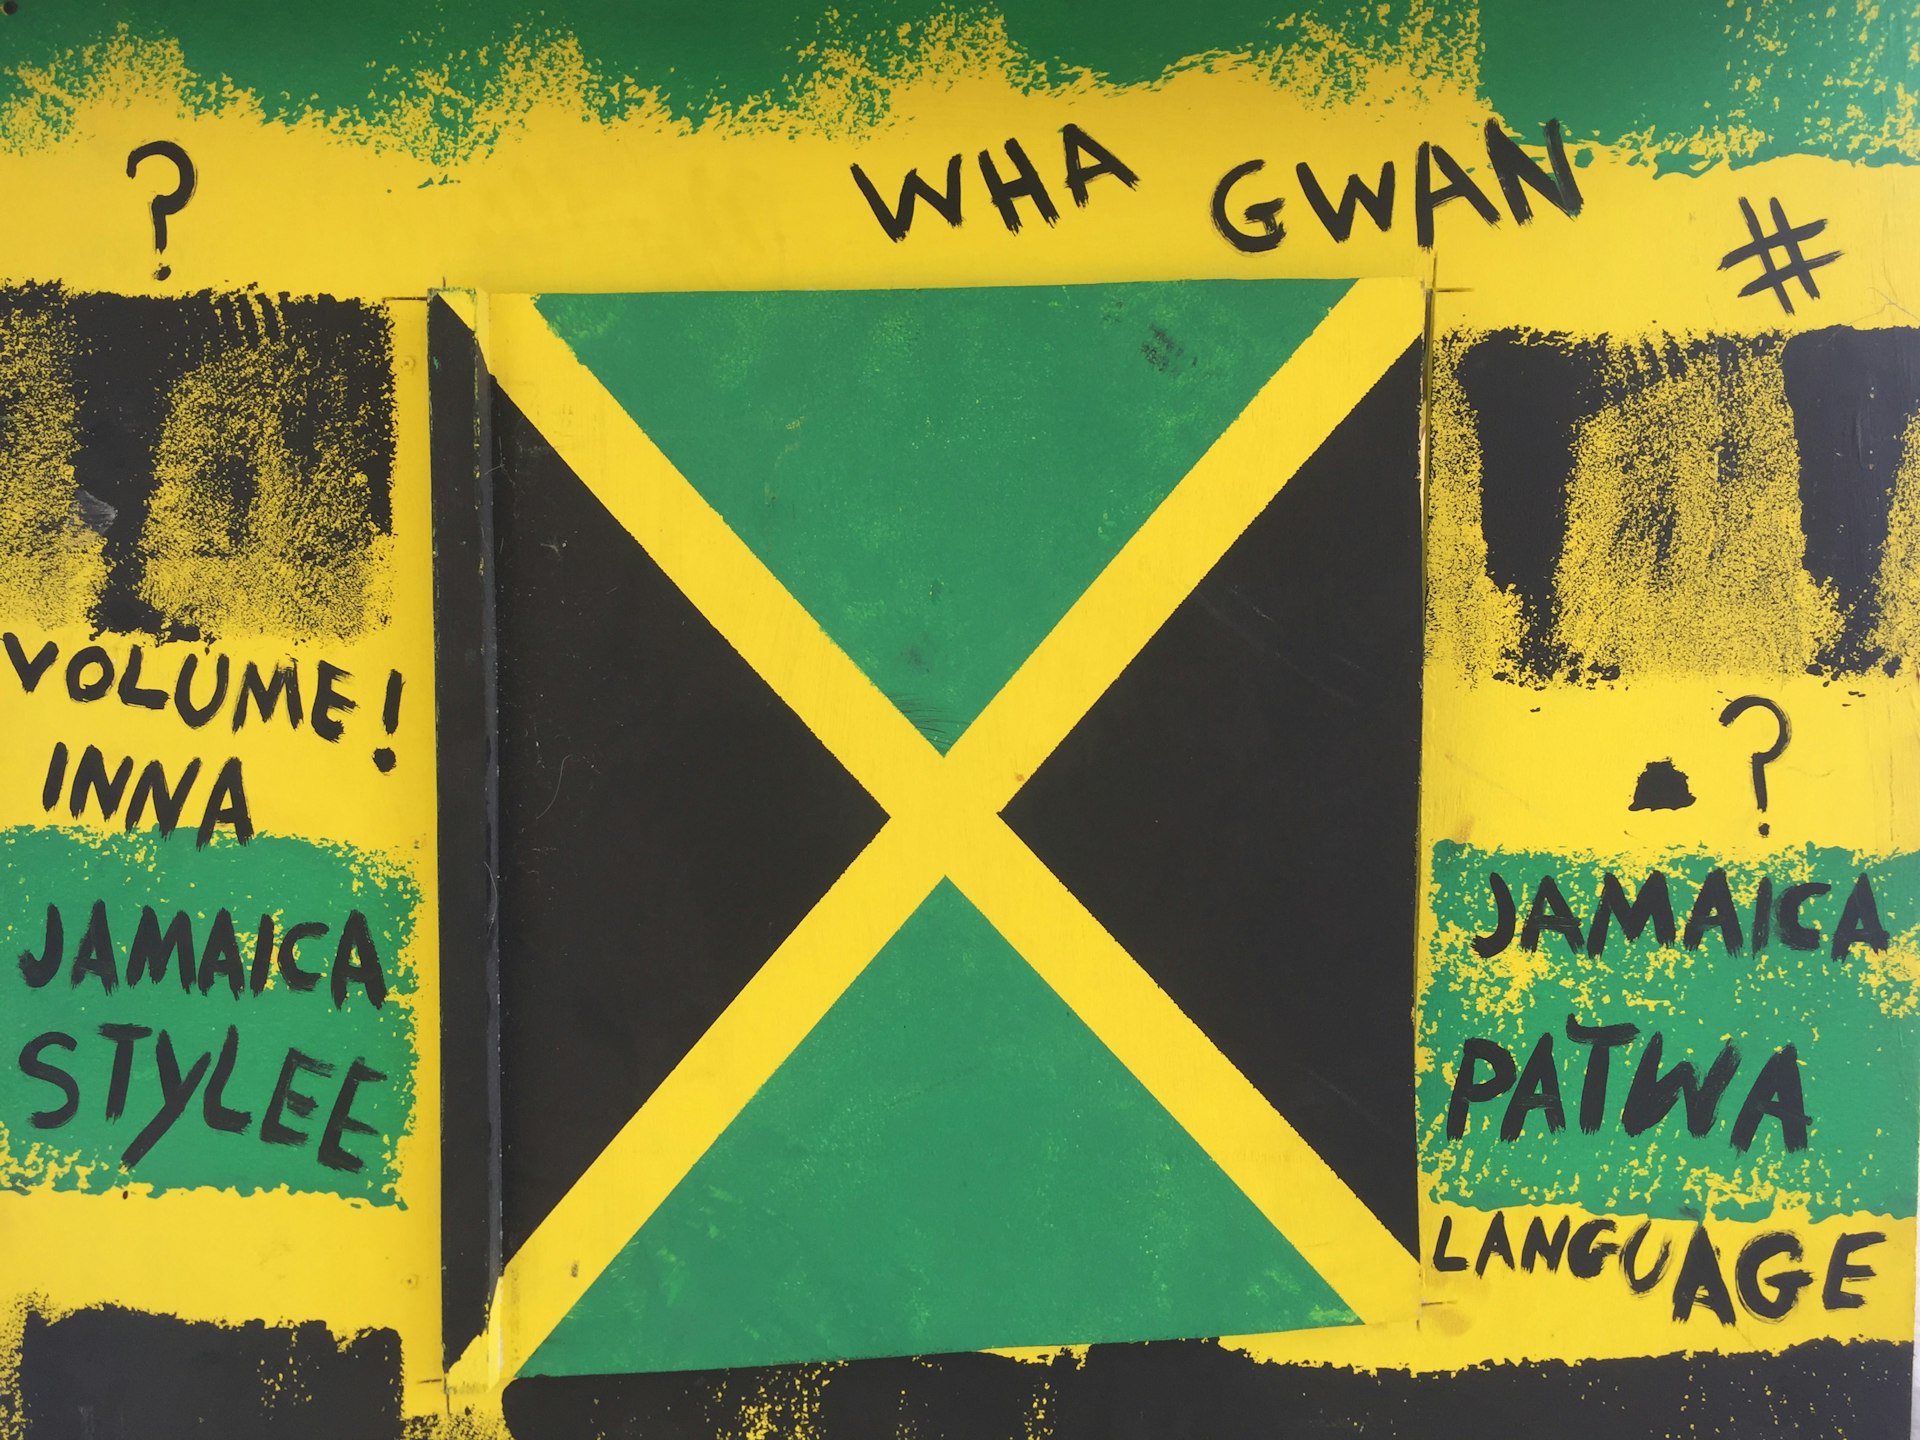 Graffiti written around a depiction of the Jamaican flag